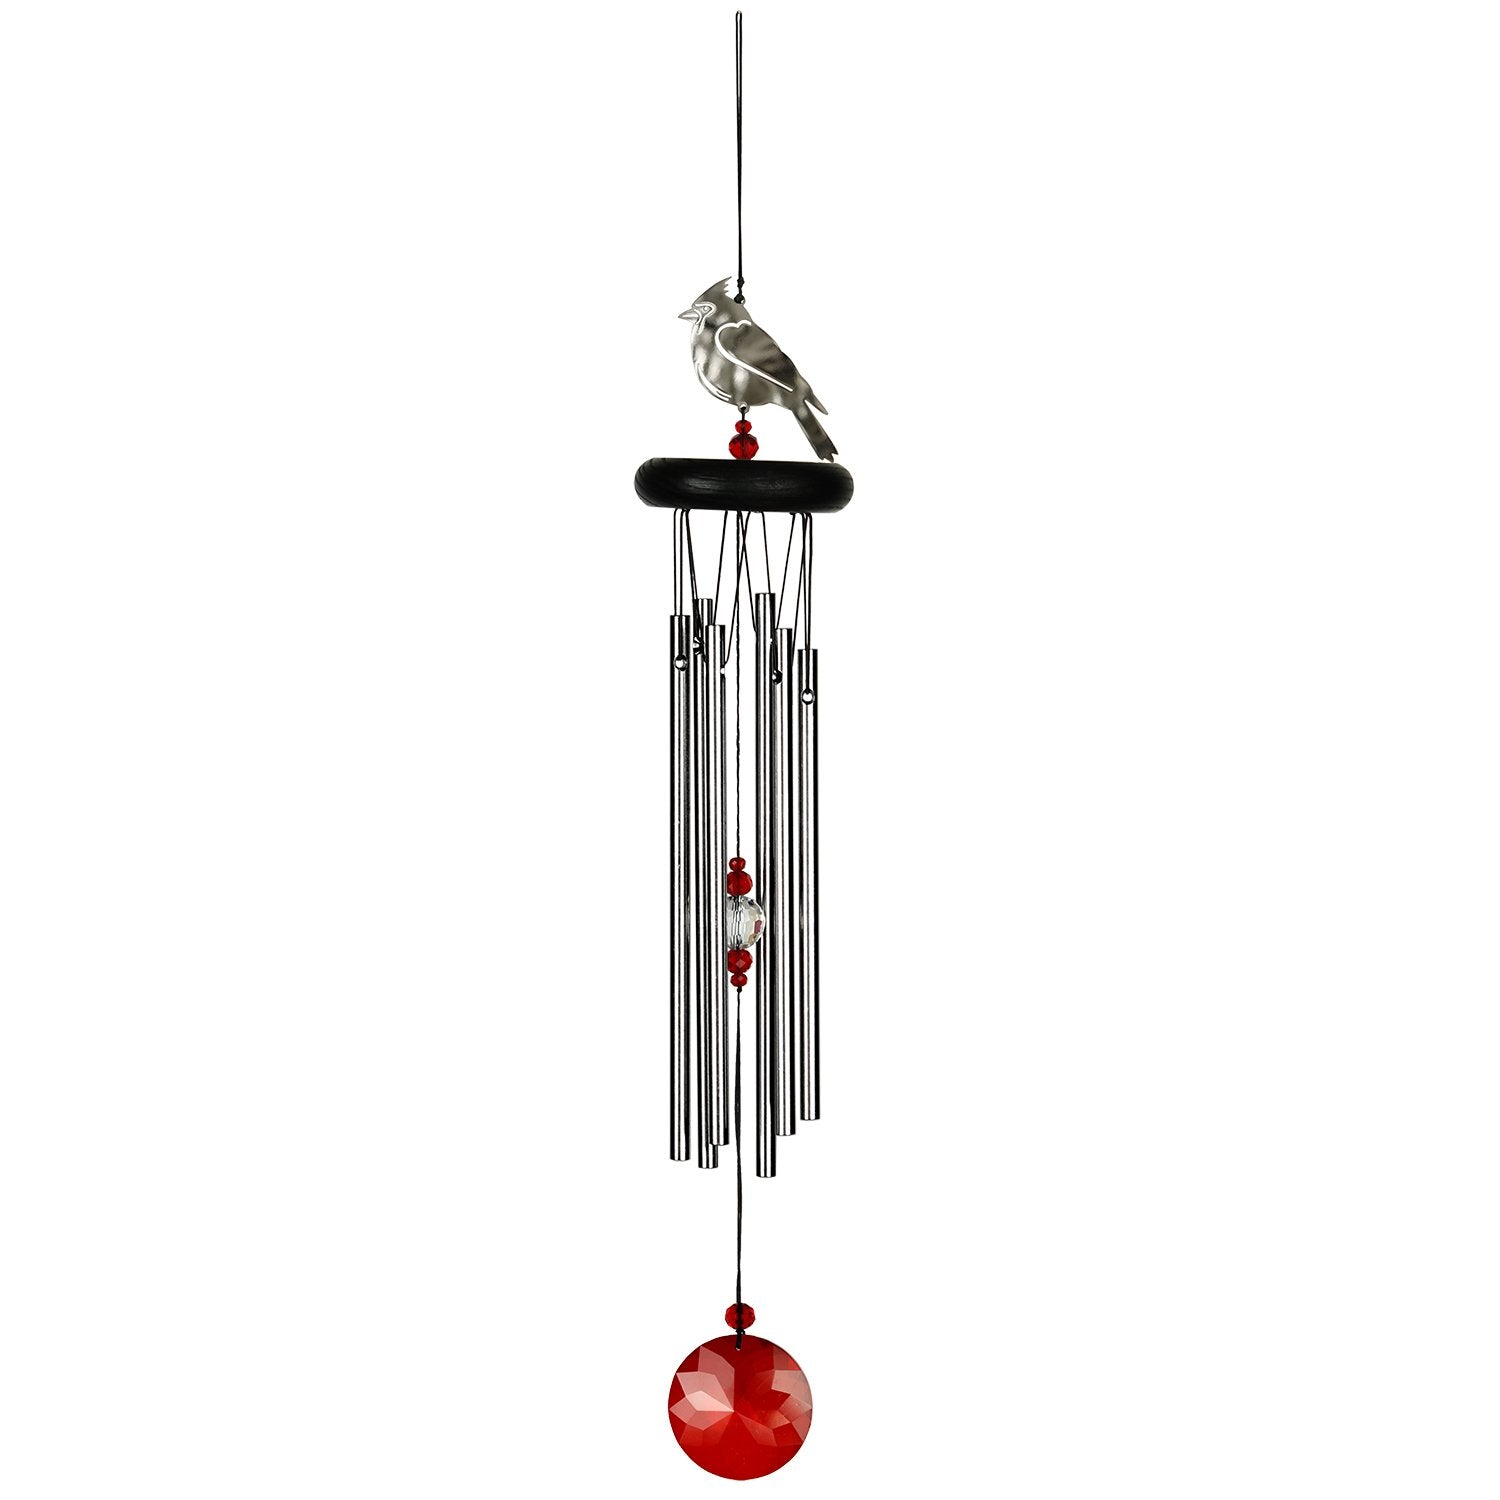 Crystal Cardinal Chime full product image